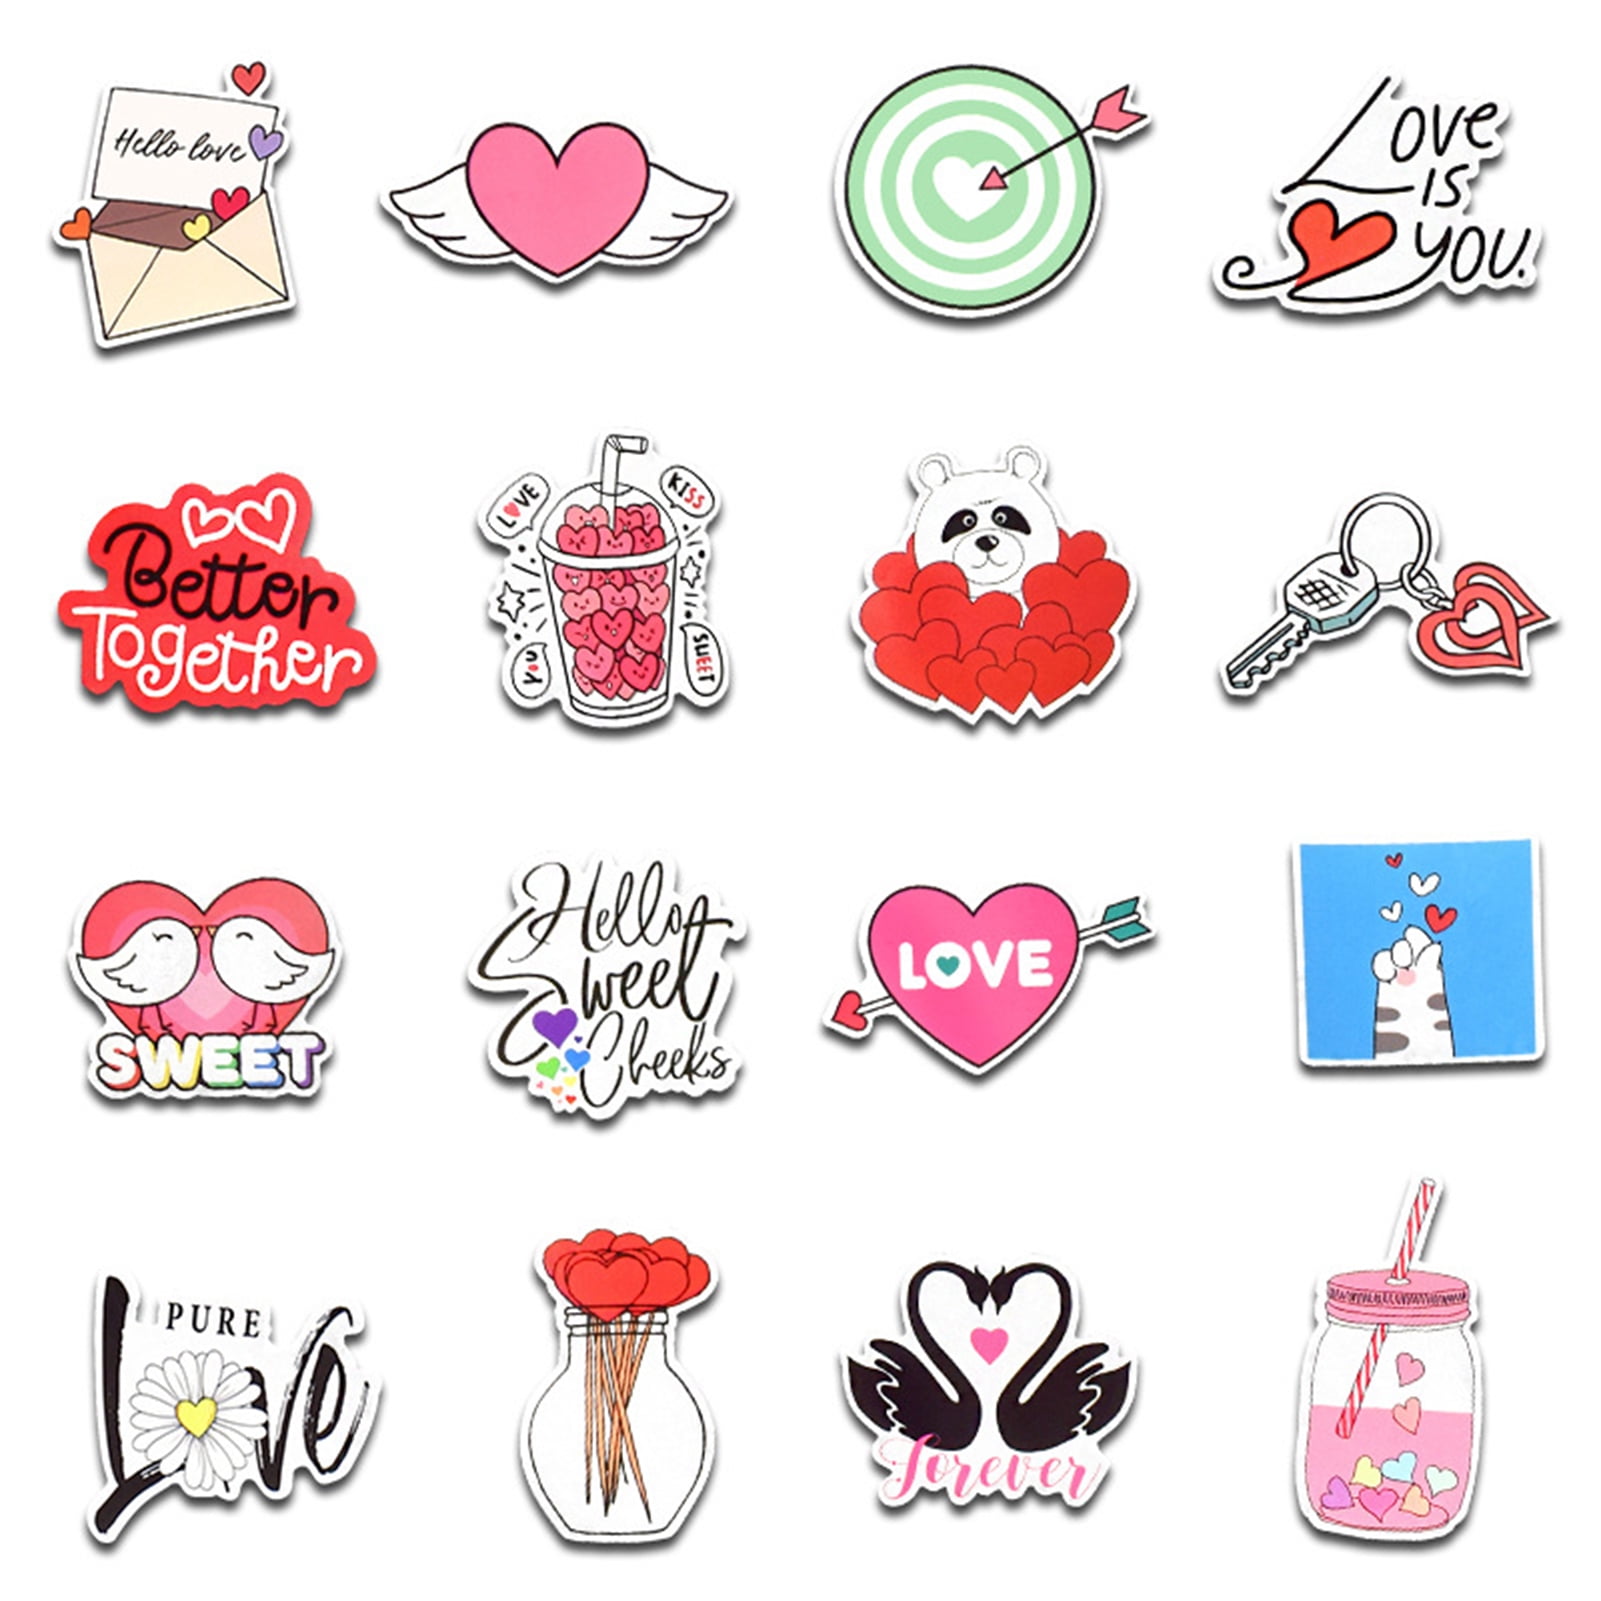 Waterproof Pvc Guka Diy Material Lovely Heart Stickers For Scrapbooking  With Adhesive Backing